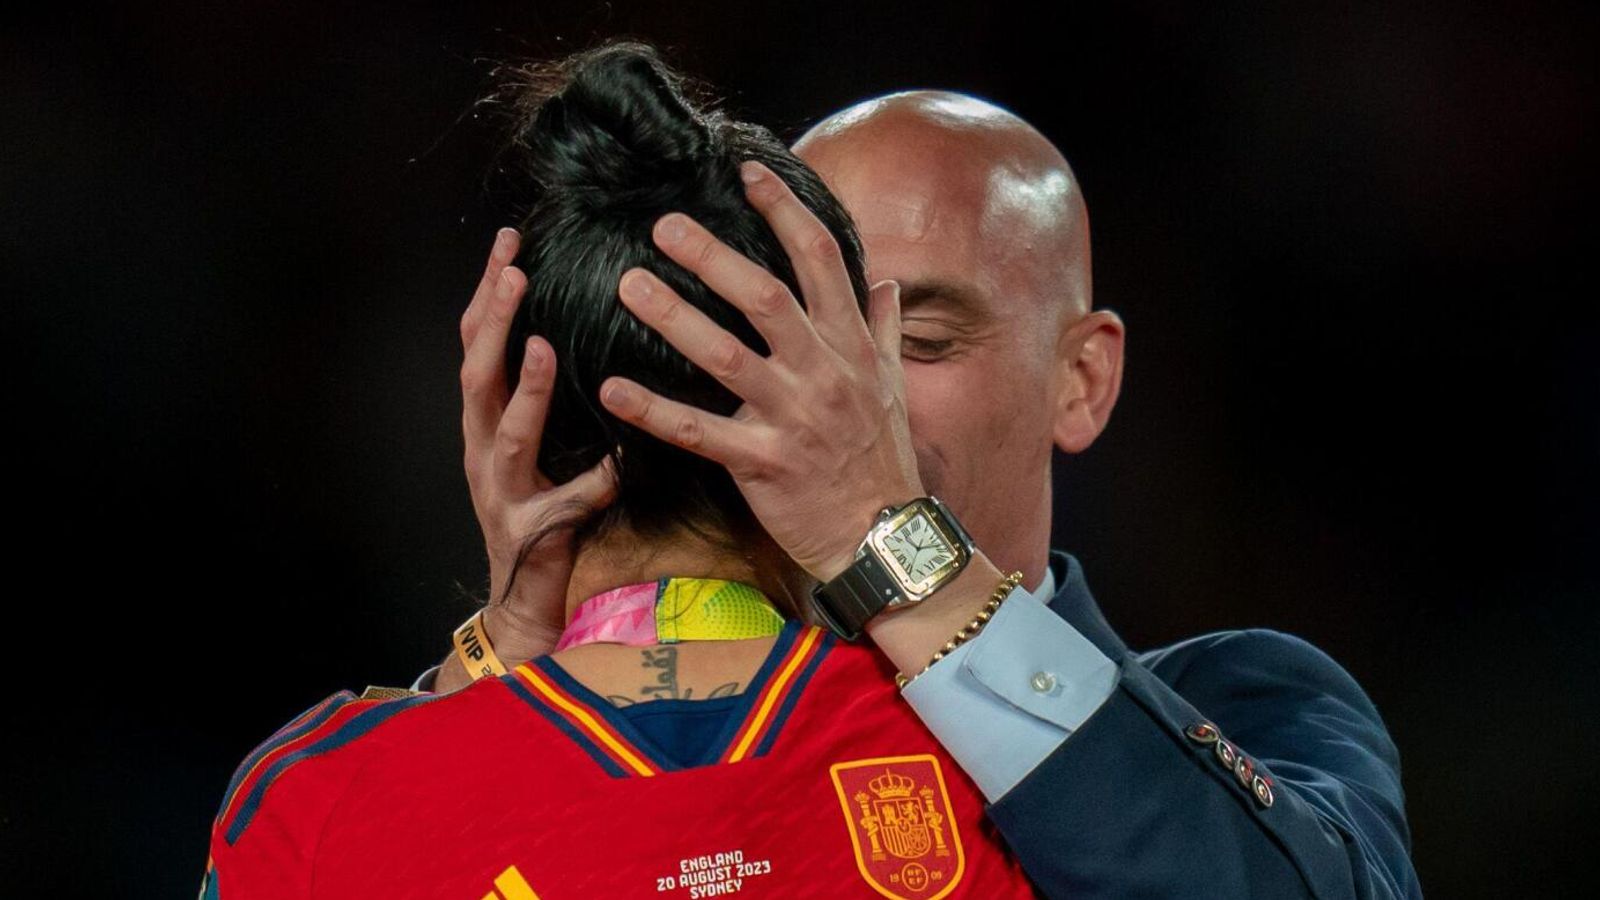 Women's World Cup: Jenni Hermoso left out of Spain squad 'to protect her' after kiss scandal